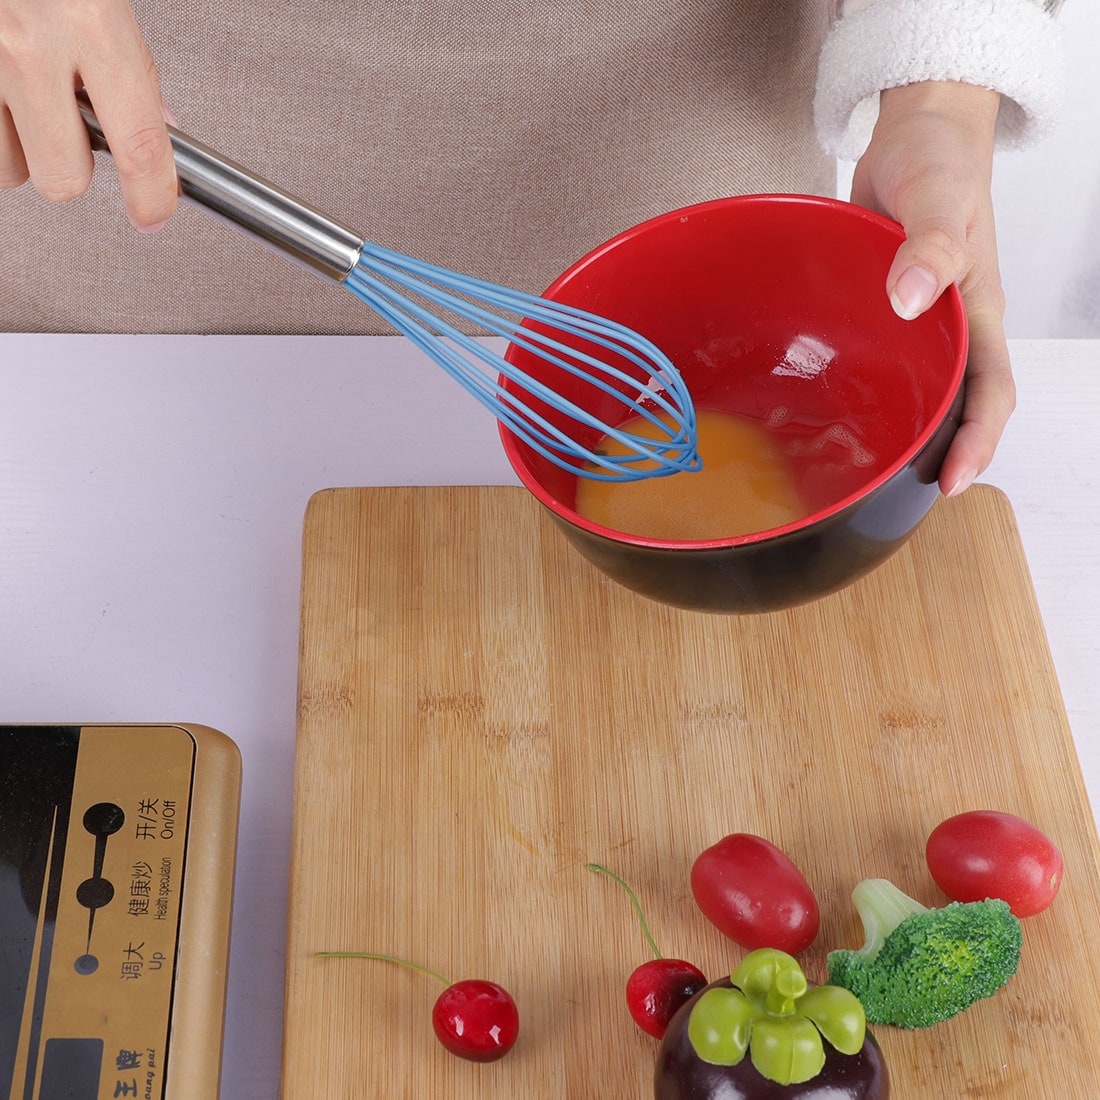 https://ak1.ostkcdn.com/images/products/is/images/direct/e98bad1c77e3a16cc97547af4b41f3b7dffca79a/Egg-Whisk-Silicone-Whisk-Mixer-Kitchen-Utensil.jpg